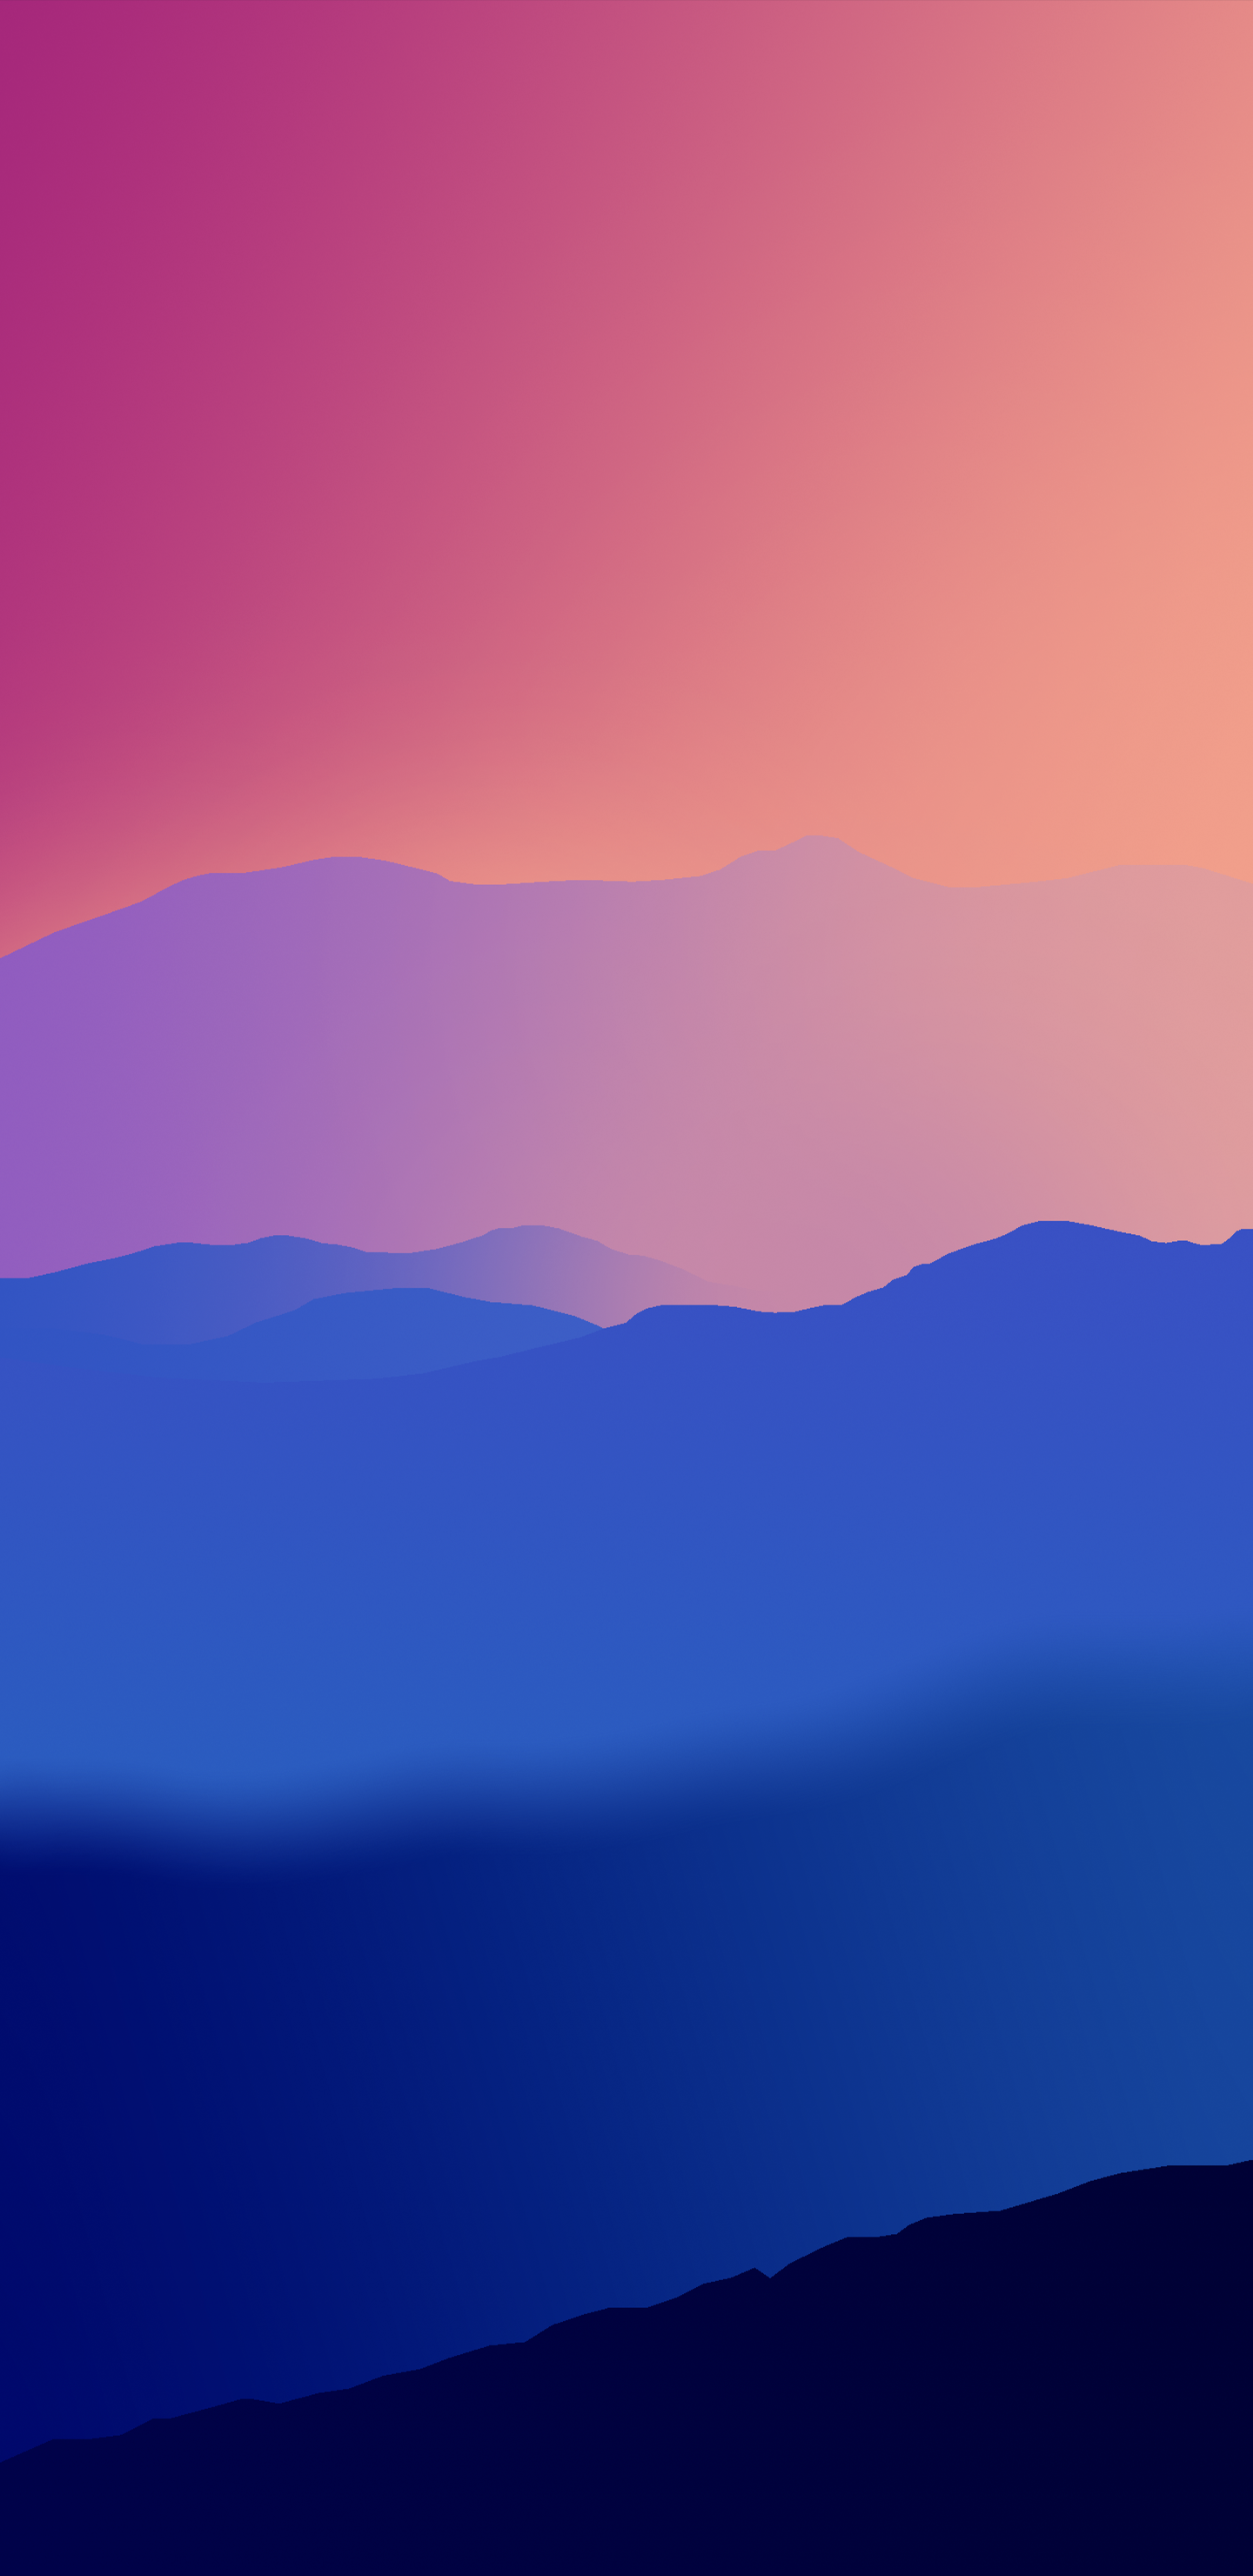 Wallpapers of the week: sunset mountains